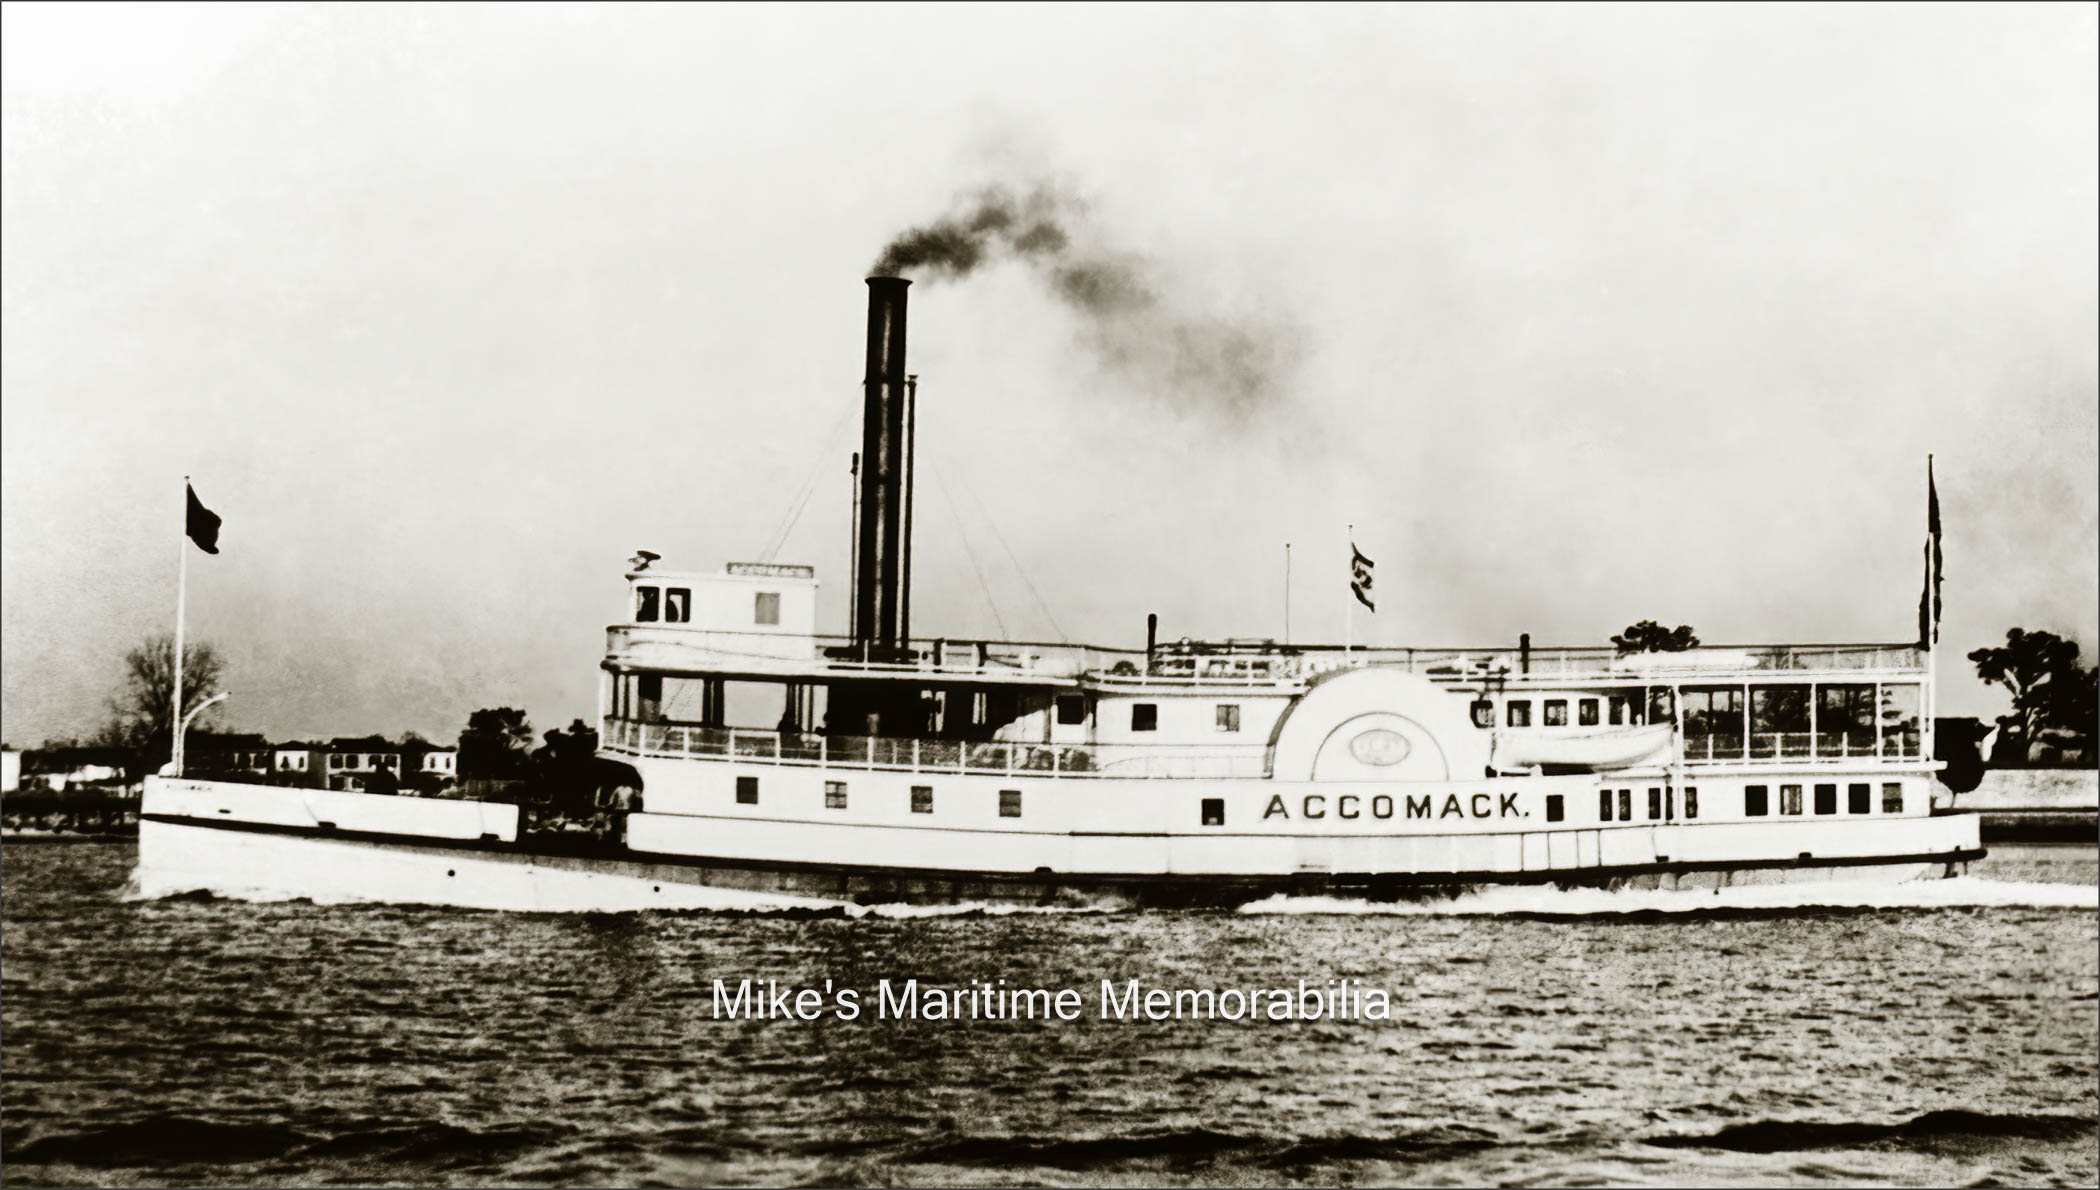 ACCOMACK, New York, NY – 1889 The "ACCOMACK" was another excursion steamer to join the Deep Sea Fishing trade. She was a 137-foot steamboat built in 1877 at Brooklyn, New York and sailed on a regular daily schedule from New York's East River to the fishing banks. A newspaper advertisement from September 1889 lists her as "Departing from the East 31st Street Pier at 6:35 AM and Beekman Street at 6:55 AM under the command of Fishing Pilot Henry Beebe. Fare for Gentlemen 75 cents, Ladies 50 Cents, Clubs of 5 for $3".